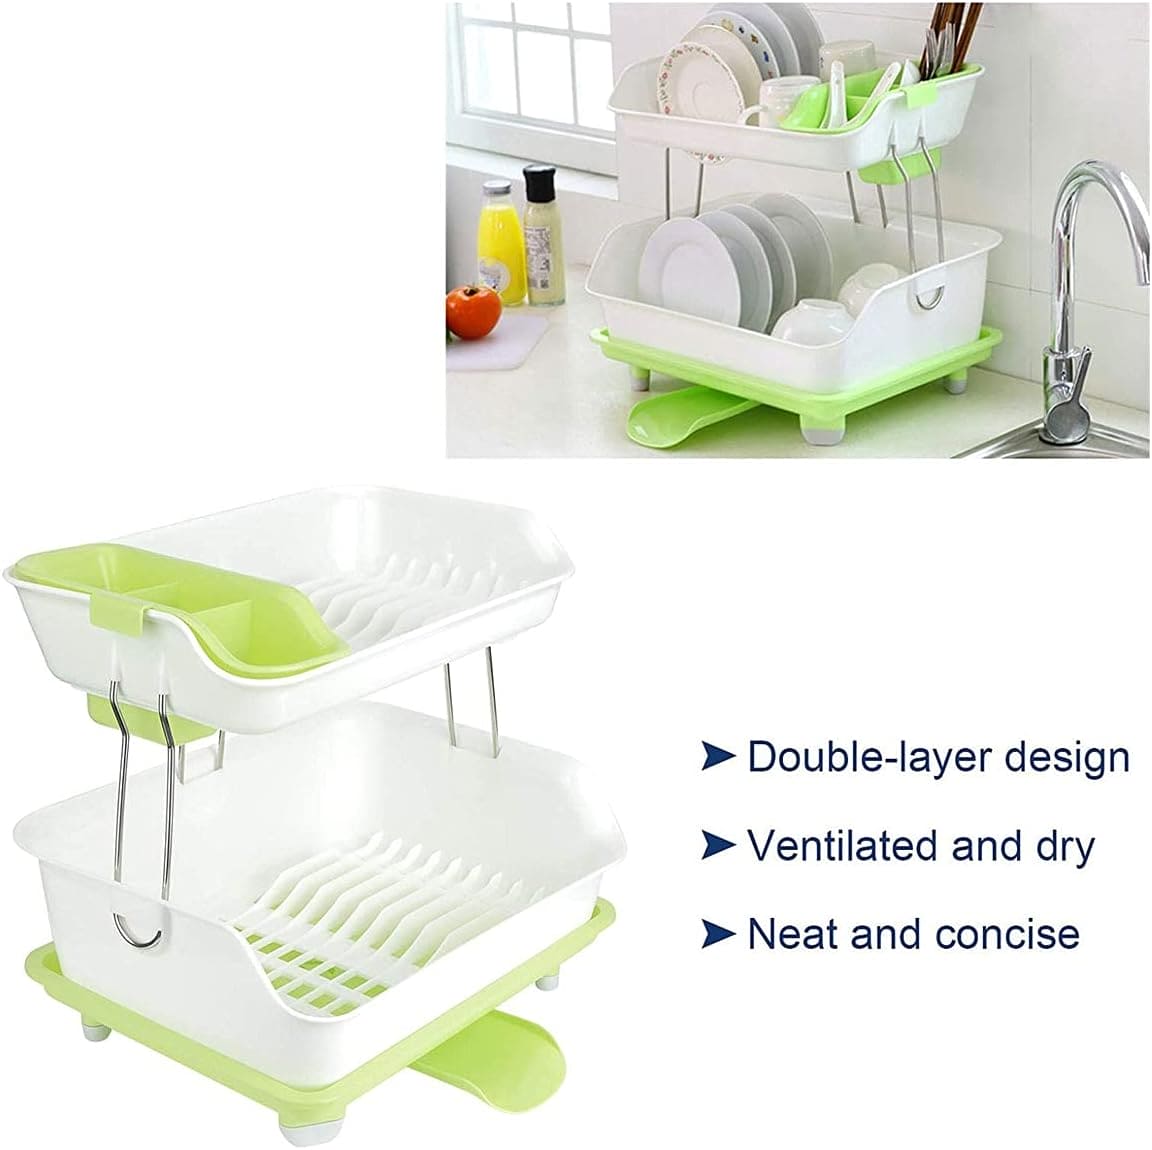 2 Tier Dish Drying Rack, Utensil Holder for Kitchen Counter, Durable Plate Rack With Drainer, Large Plastic Basket with Tray, Multipurpose Kitchen Drainage Storage Rack, Kitchen Utensils Organizer, Portable Kitchen Storage Rack